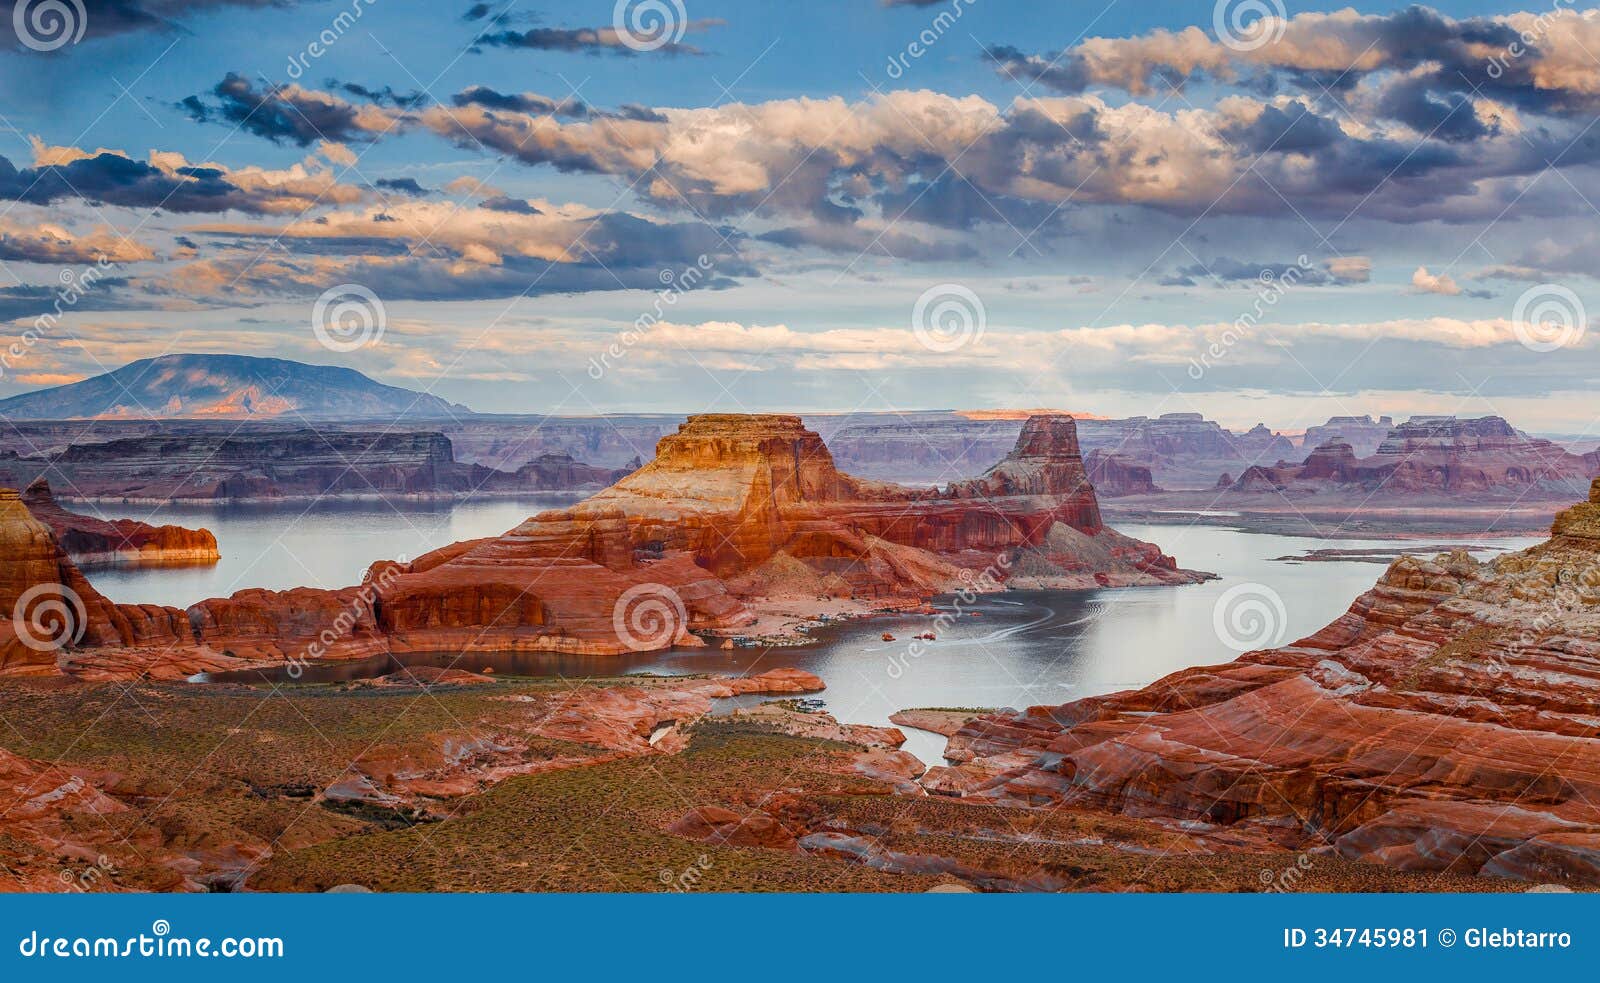 lake powell from alstrom point